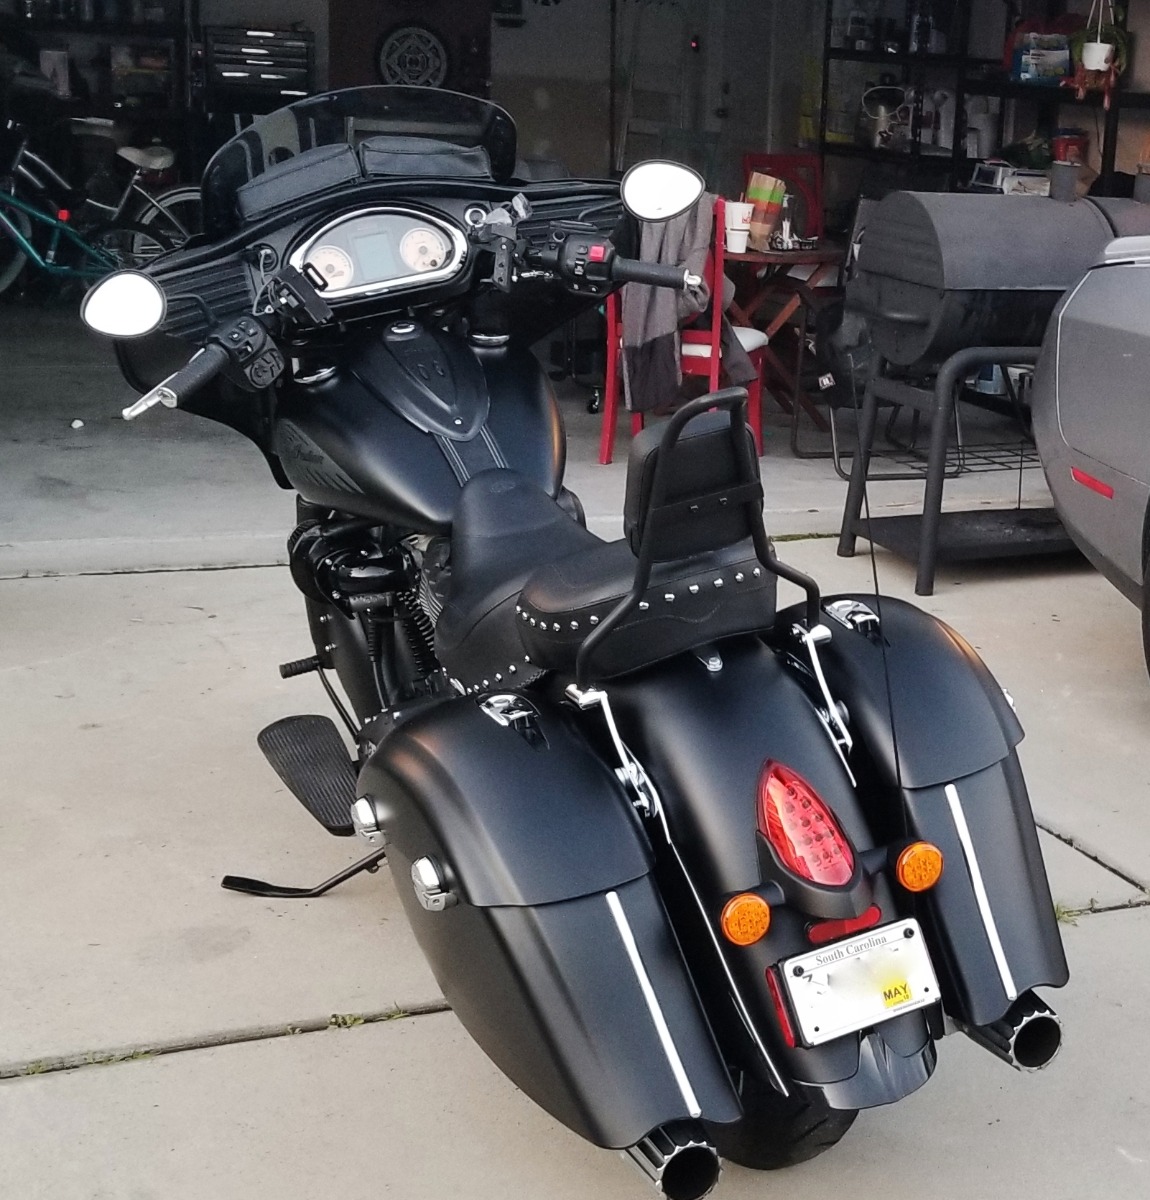 2017 Chieftain Dark Horse with Ginz Choppers Rolling Hell Bar Hopper sissy bar